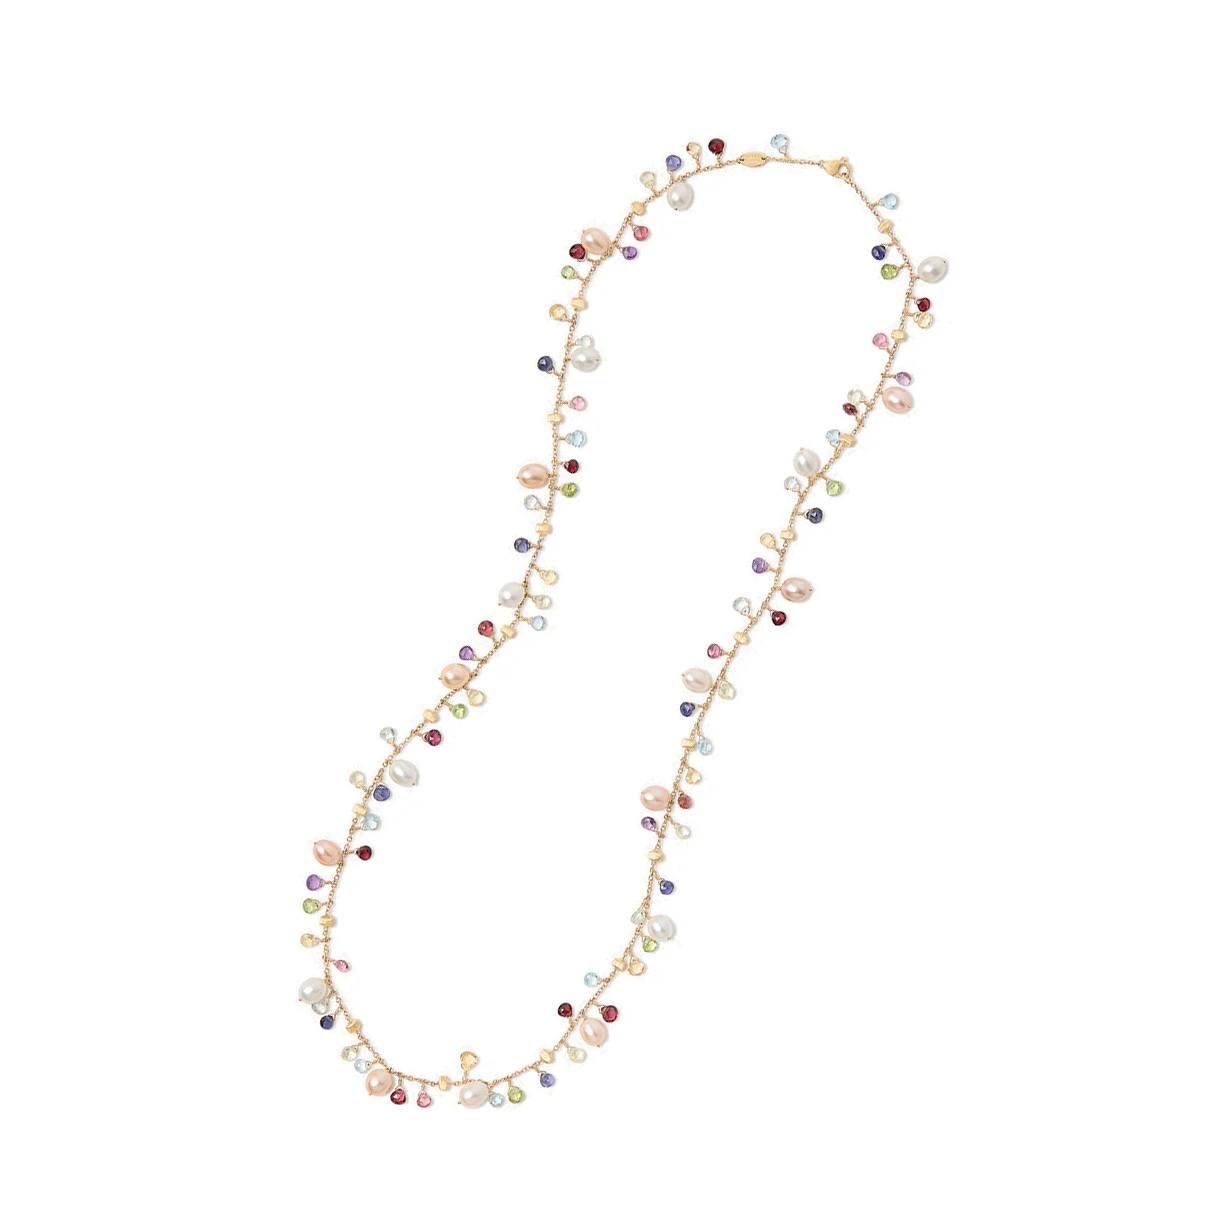 Marco Bicego Paradise Long Mixed Gemstone and Pearl Necklace